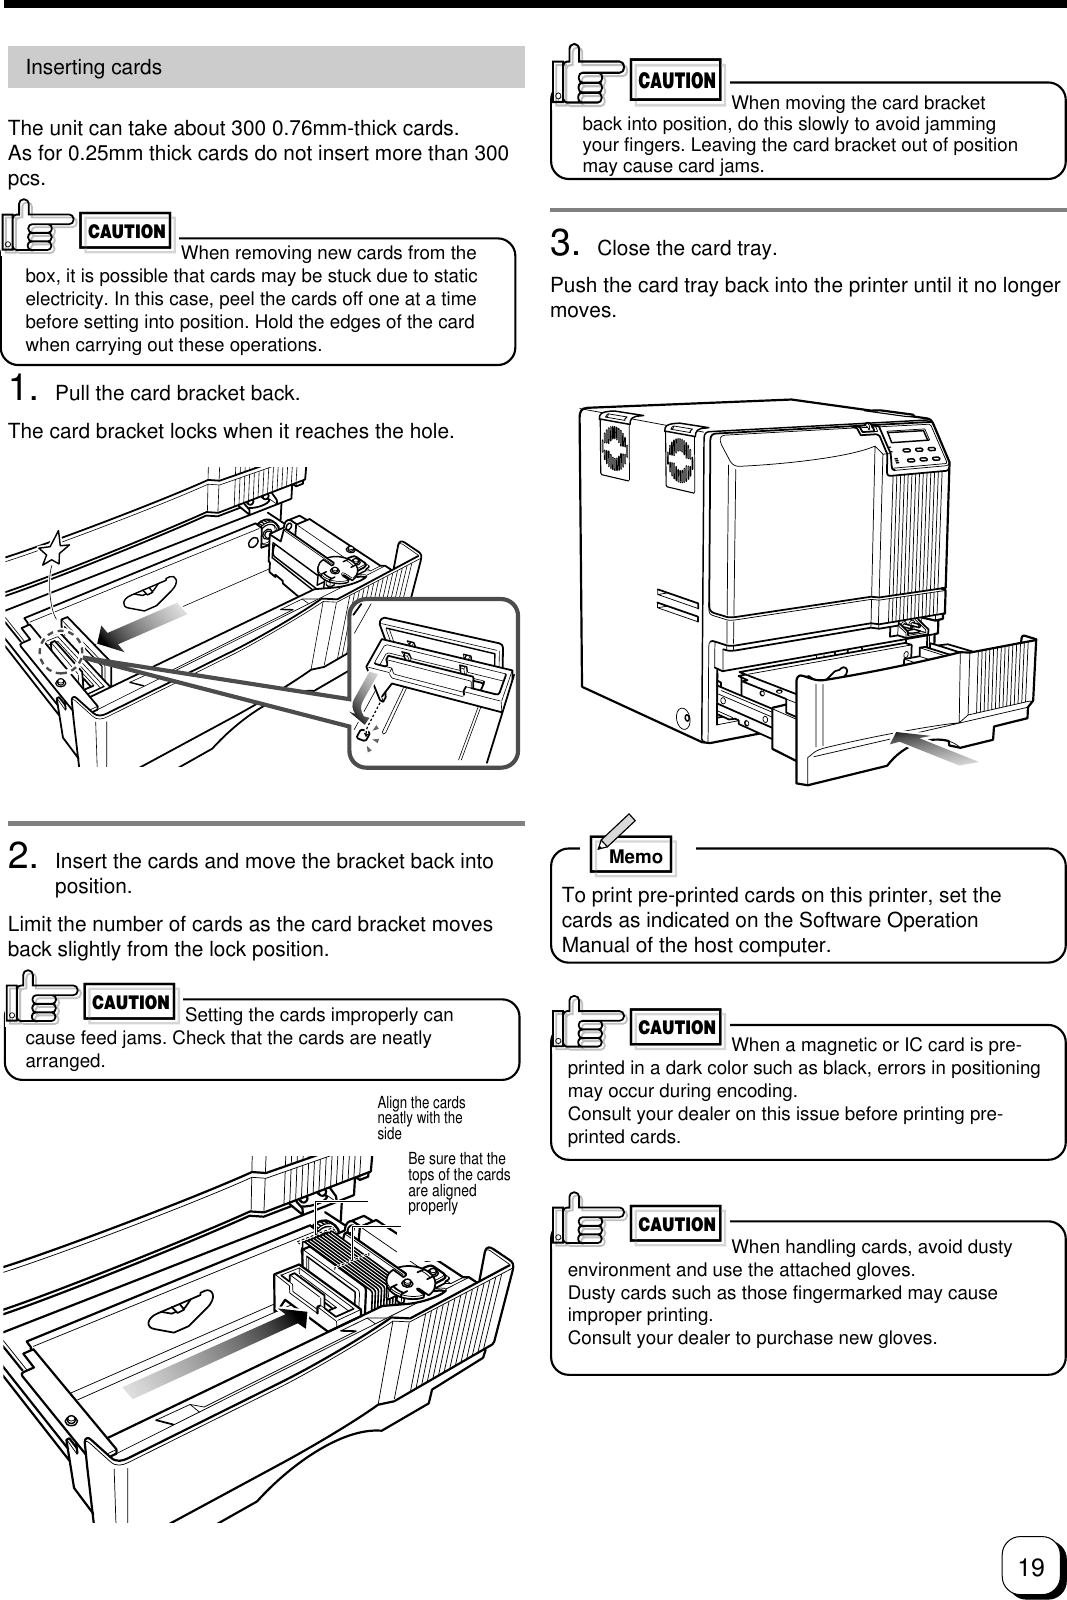 193. Close the card tray.Push the card tray back into the printer until it no longermoves.MemoTo print pre-printed cards on this printer, set thecards as indicated on the Software OperationManual of the host computer.When a magnetic or IC card is pre-printed in a dark color such as black, errors in positioningmay occur during encoding.Consult your dealer on this issue before printing pre-printed cards.CAUTIONInserting cardsThe unit can take about 300 0.76mm-thick cards.As for 0.25mm thick cards do not insert more than 300pcs.When removing new cards from thebox, it is possible that cards may be stuck due to staticelectricity. In this case, peel the cards off one at a timebefore setting into position. Hold the edges of the cardwhen carrying out these operations.1. Pull the card bracket back.The card bracket locks when it reaches the hole.2. Insert the cards and move the bracket back intoposition.Limit the number of cards as the card bracket movesback slightly from the lock position.Setting the cards improperly cancause feed jams. Check that the cards are neatlyarranged.CAUTIONCAUTIONCAUTIONAlign the cardsneatly with thesideBe sure that thetops of the cardsare alignedproperlyCAUTIONWhen handling cards, avoid dustyenvironment and use the attached gloves.Dusty cards such as those fingermarked may causeimproper printing.Consult your dealer to purchase new gloves.When moving the card bracketback into position, do this slowly to avoid jammingyour fingers. Leaving the card bracket out of positionmay cause card jams.